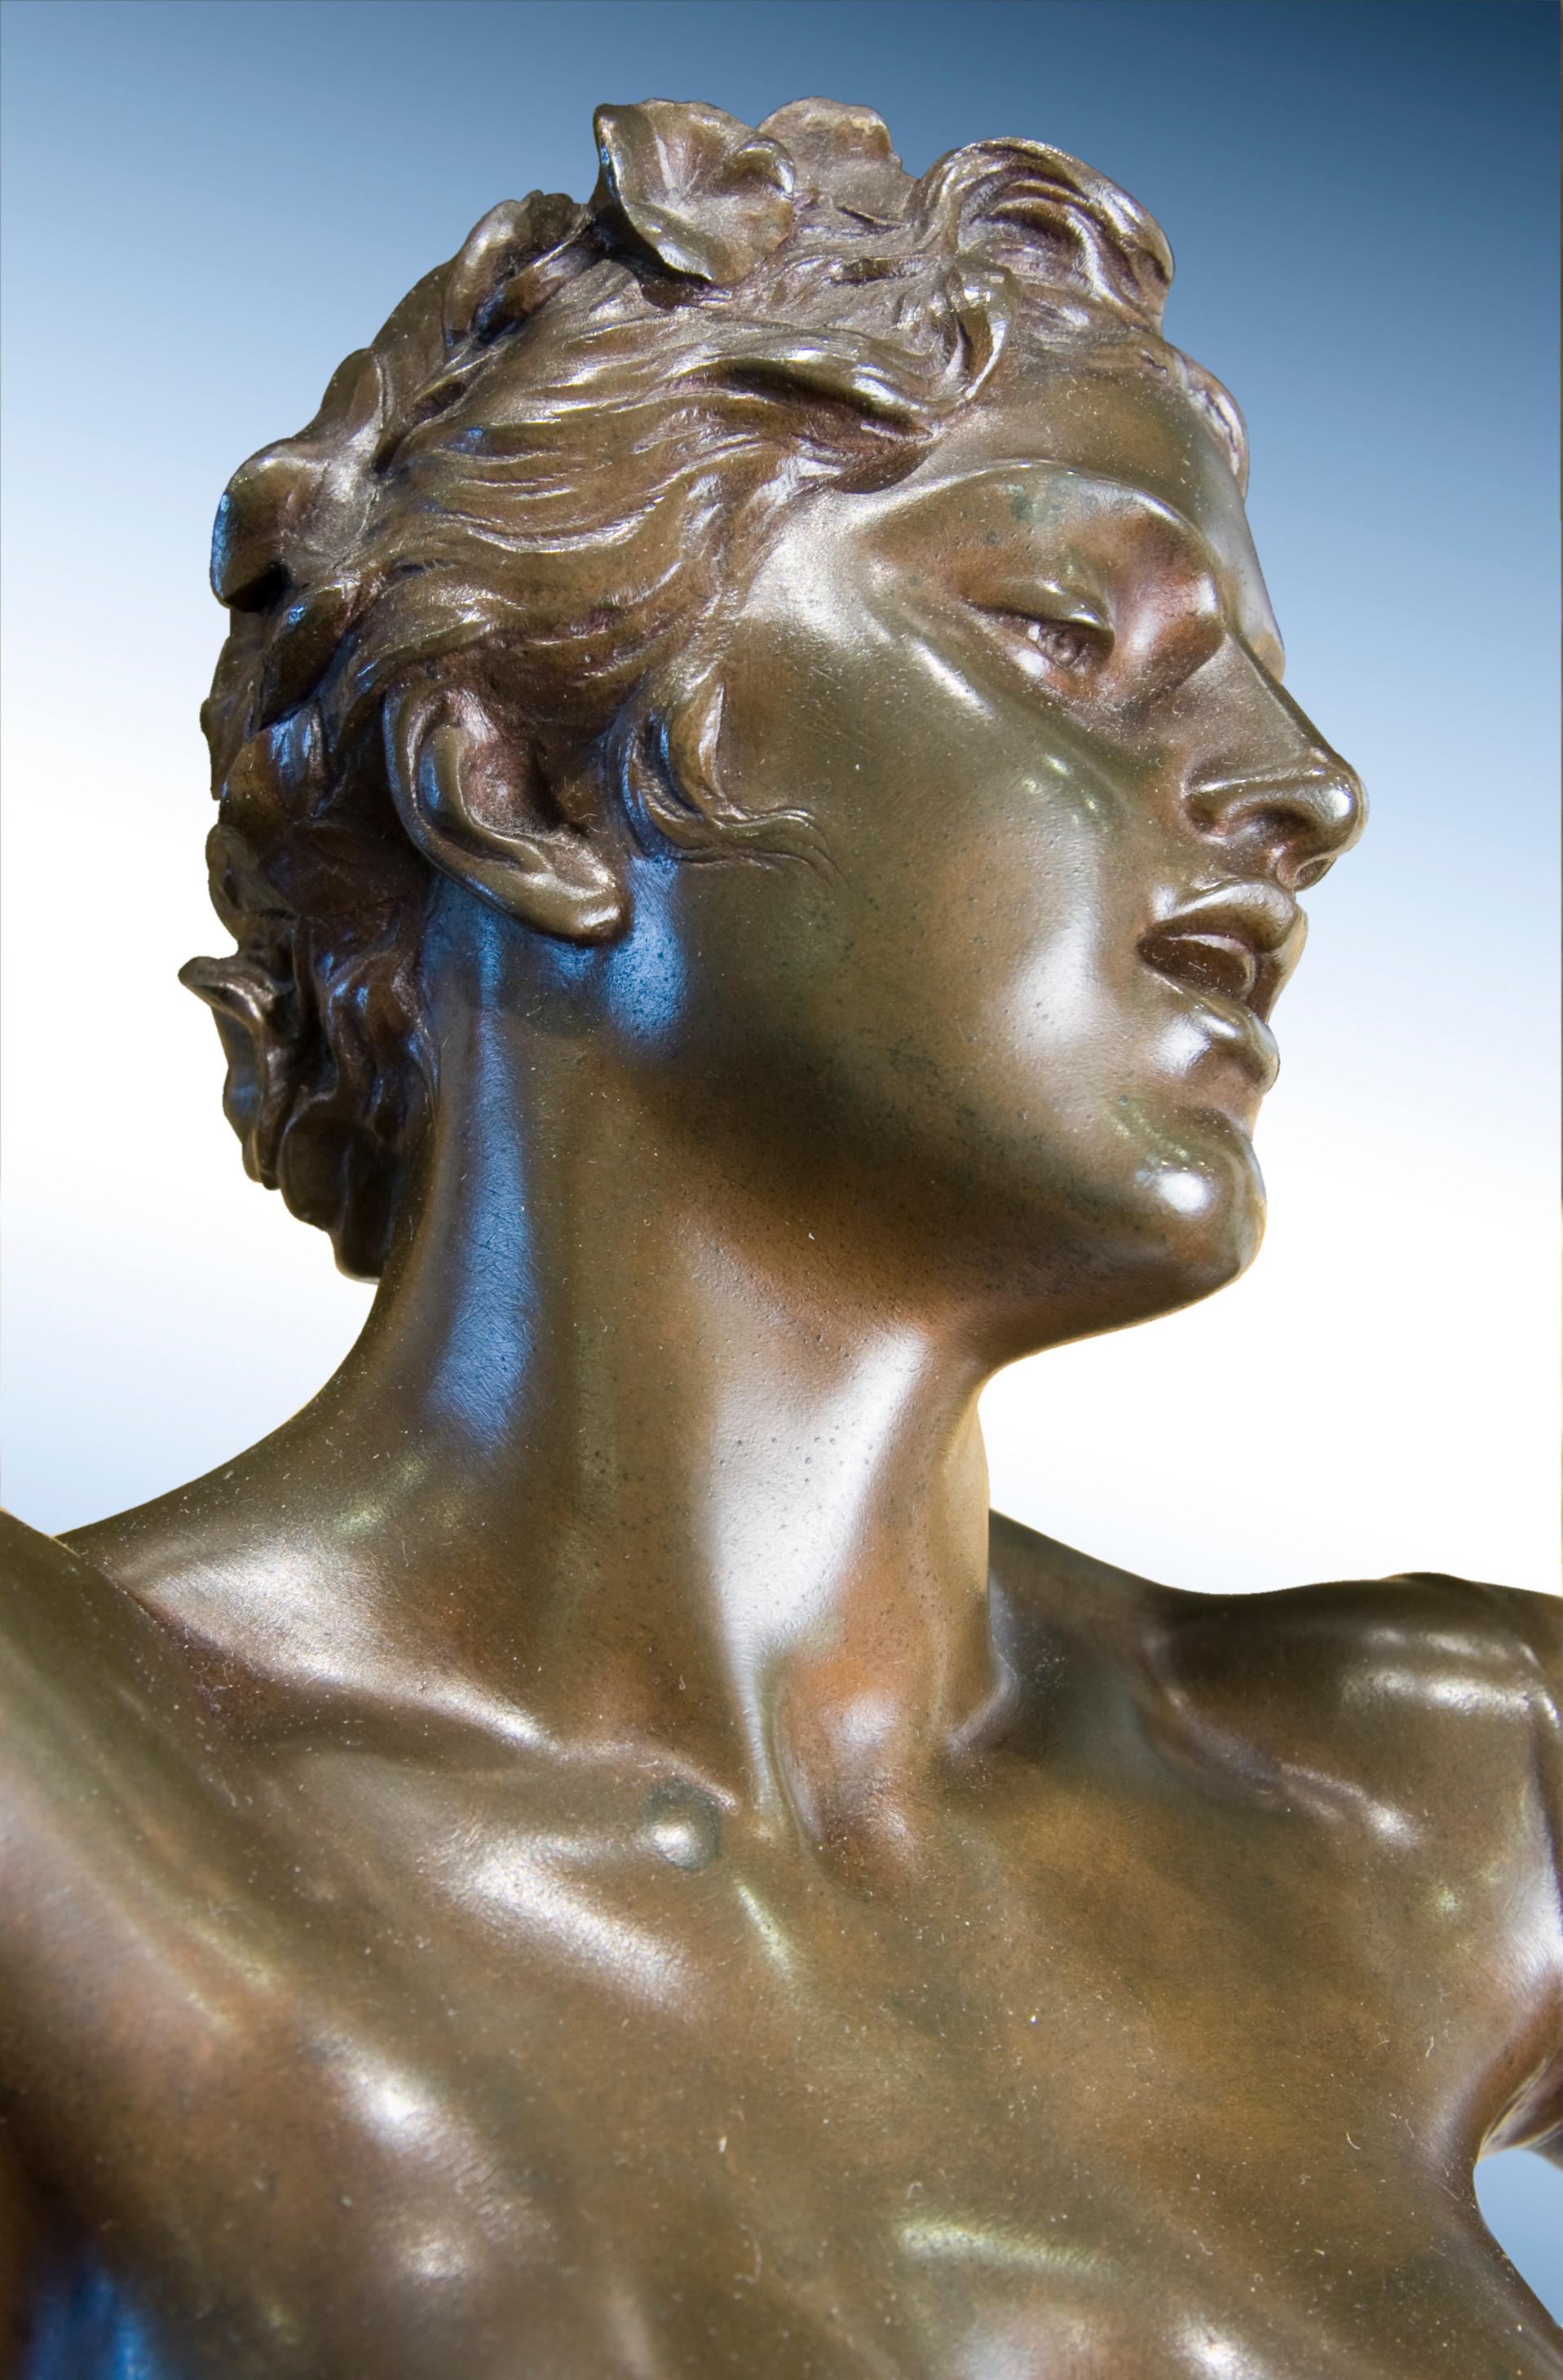 Félix-Maurice Charpentier was a well-known and successful sculptor active in Paris during the latter half of the nineteenth century. Working in marble, terra cotta, and bronze, Charpentier exhibited many works at the Salon as well as executed